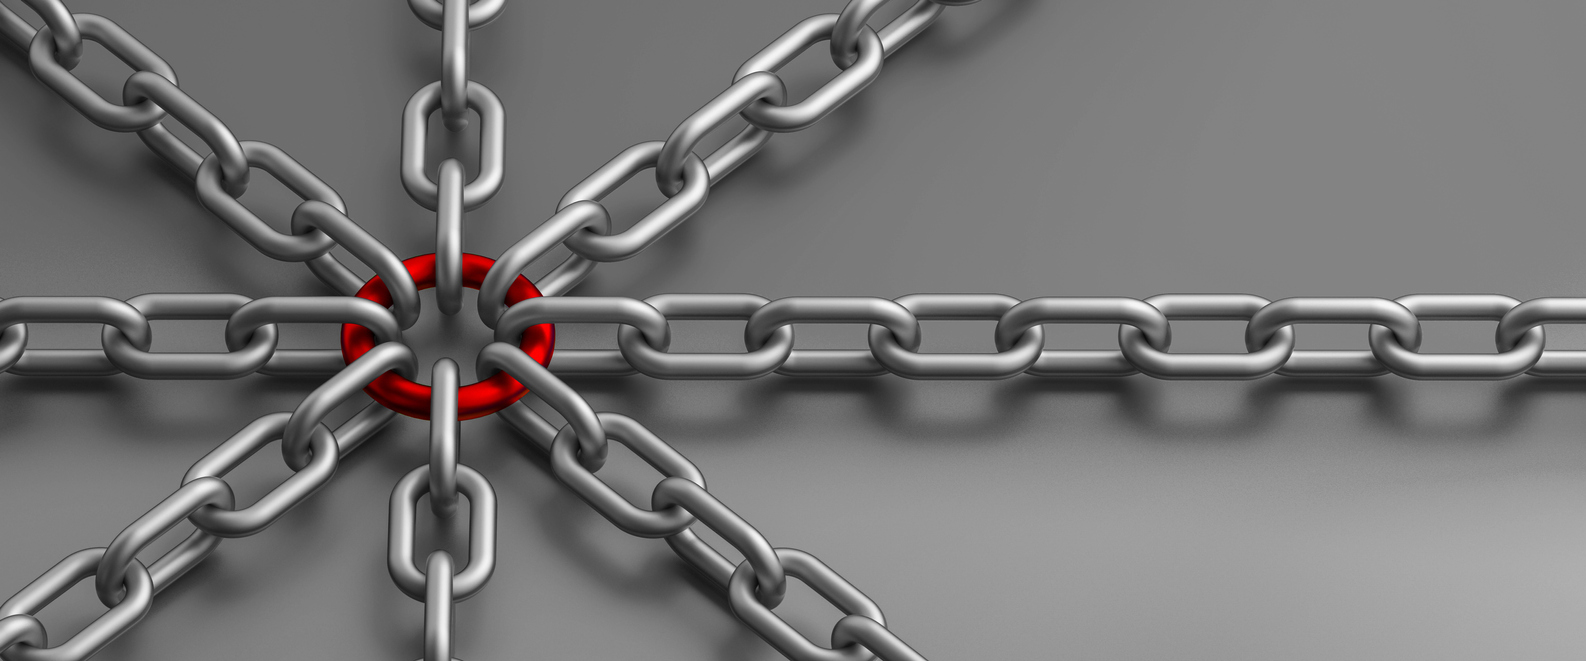 Chains representing link building